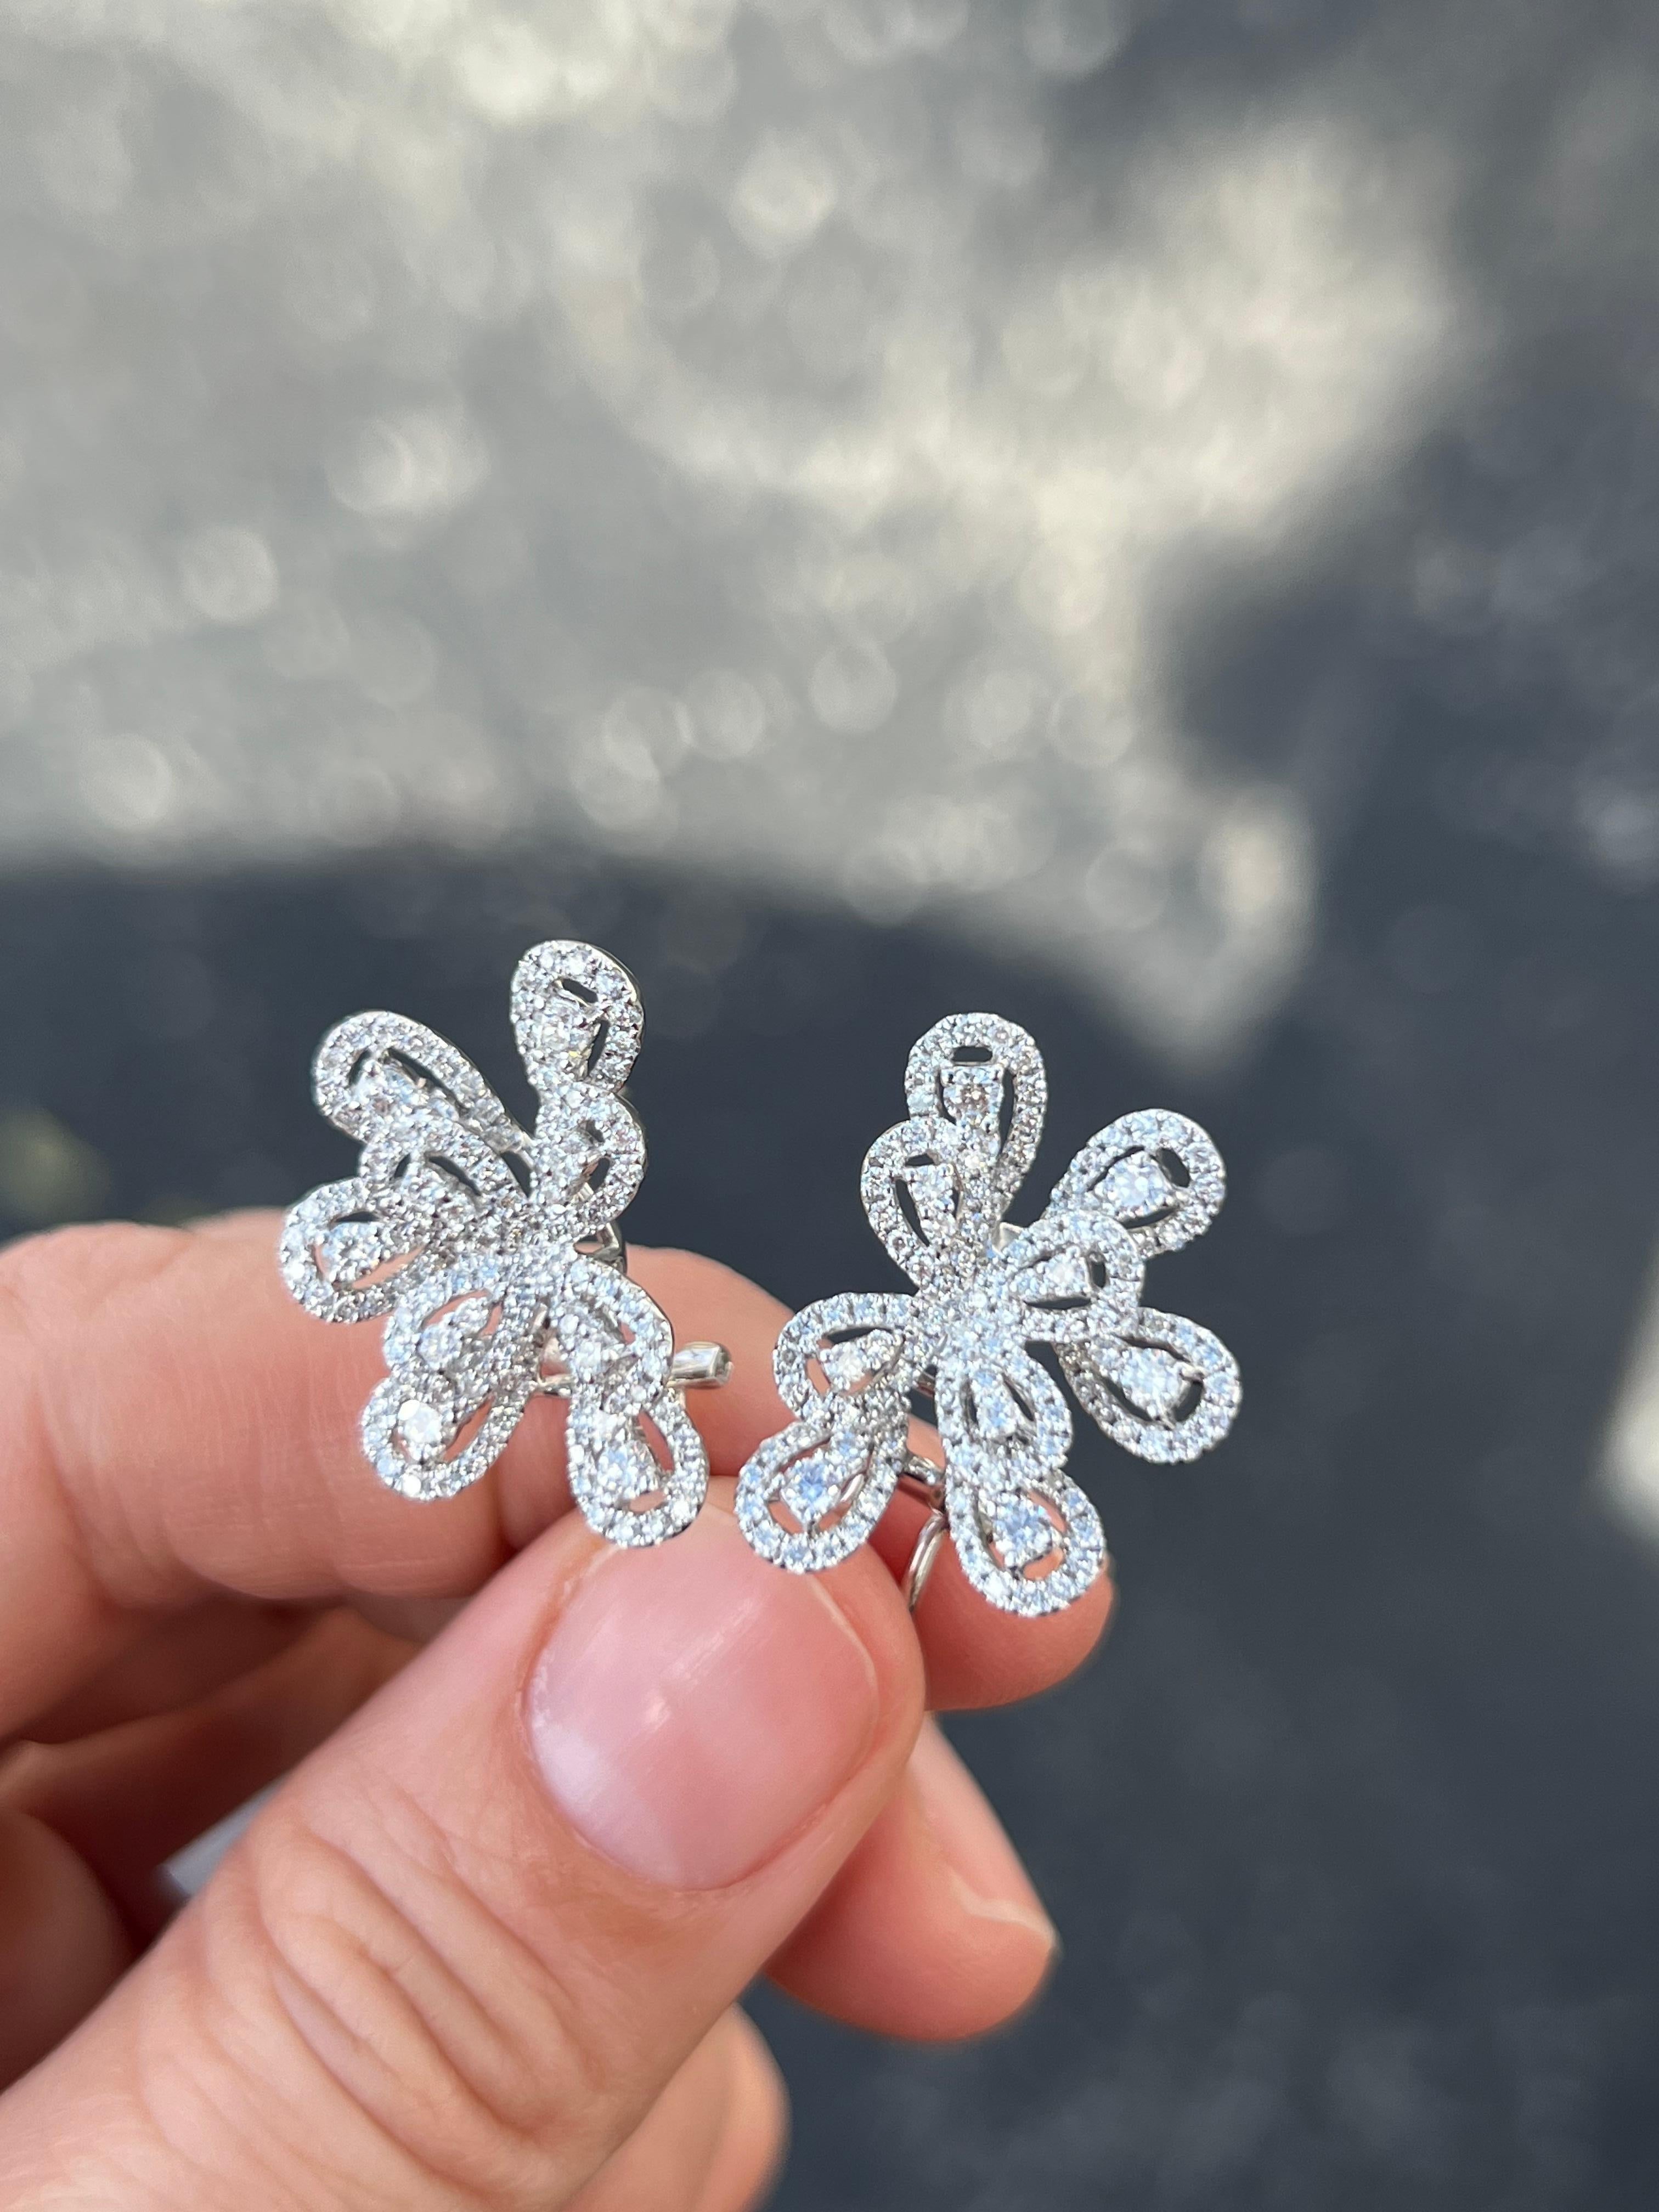 18K white gold and diamond firework design statement earrings. Beautiful for a special event,  stunning for daily use. 

Features
18K white gold
2.02 carat total weight in diamond
Post earring with clip closure
Earrings measure approx. 23 mm